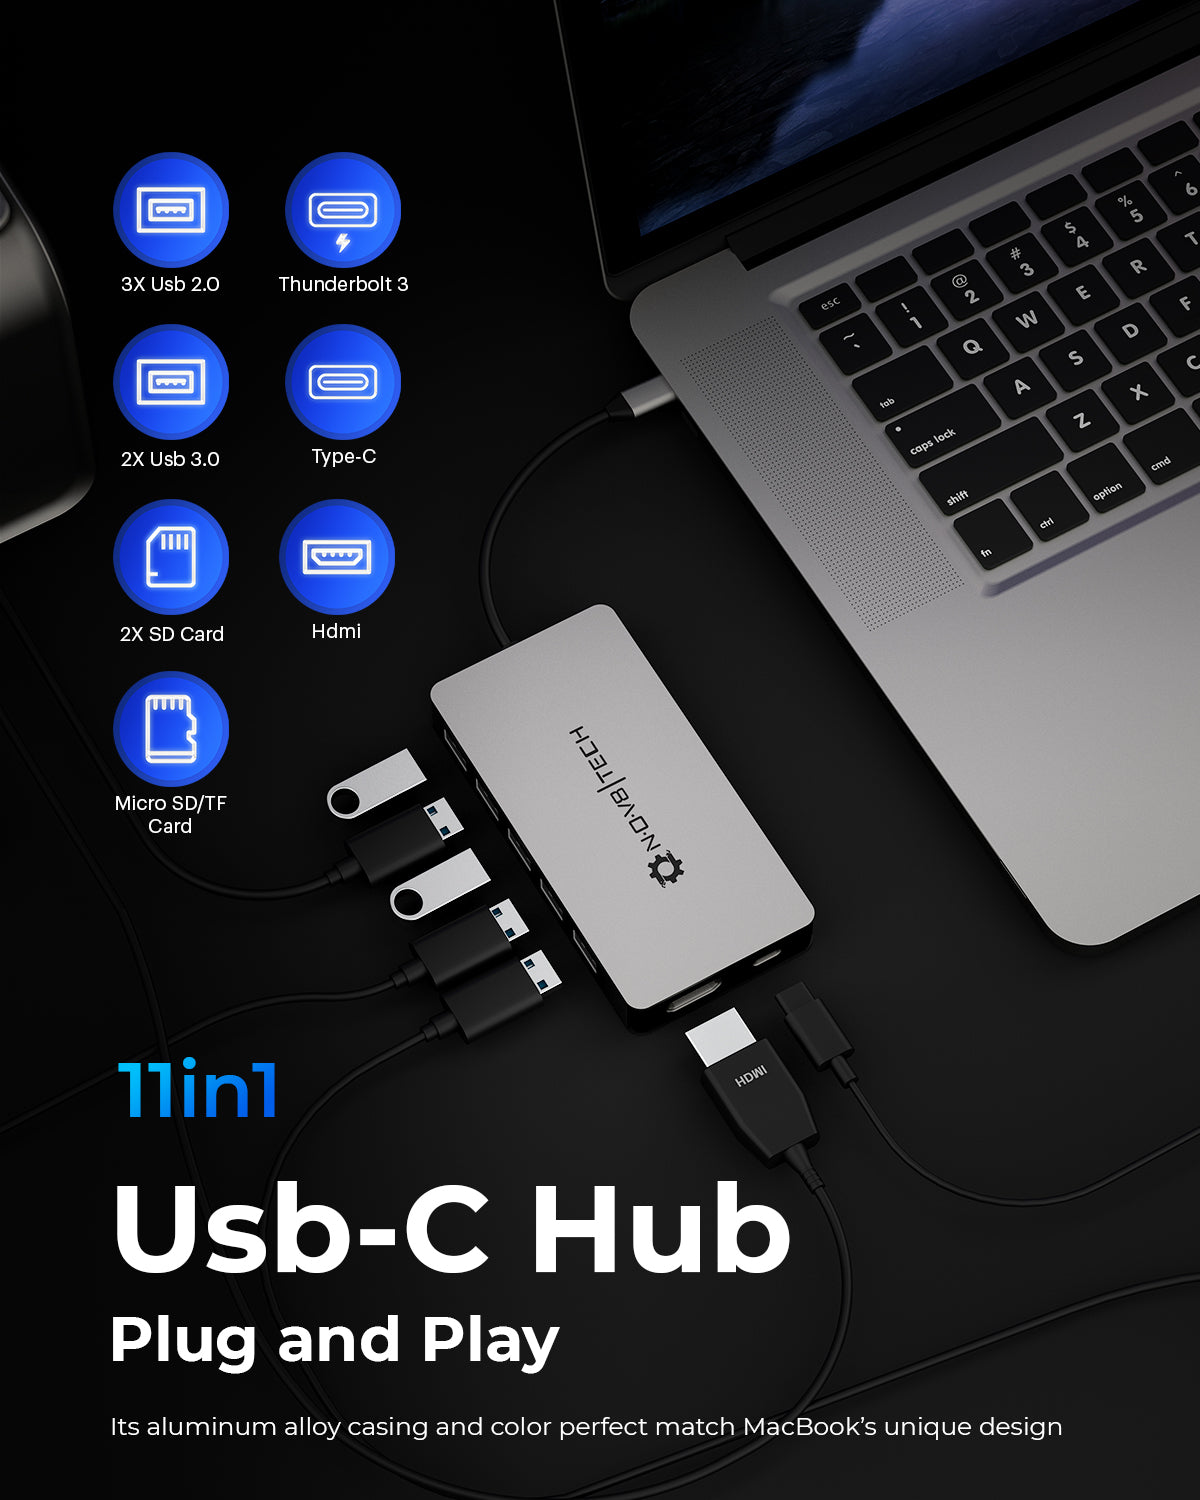 What Is A Multiport USB C Hub, And What Are Its Applications – CableCreation